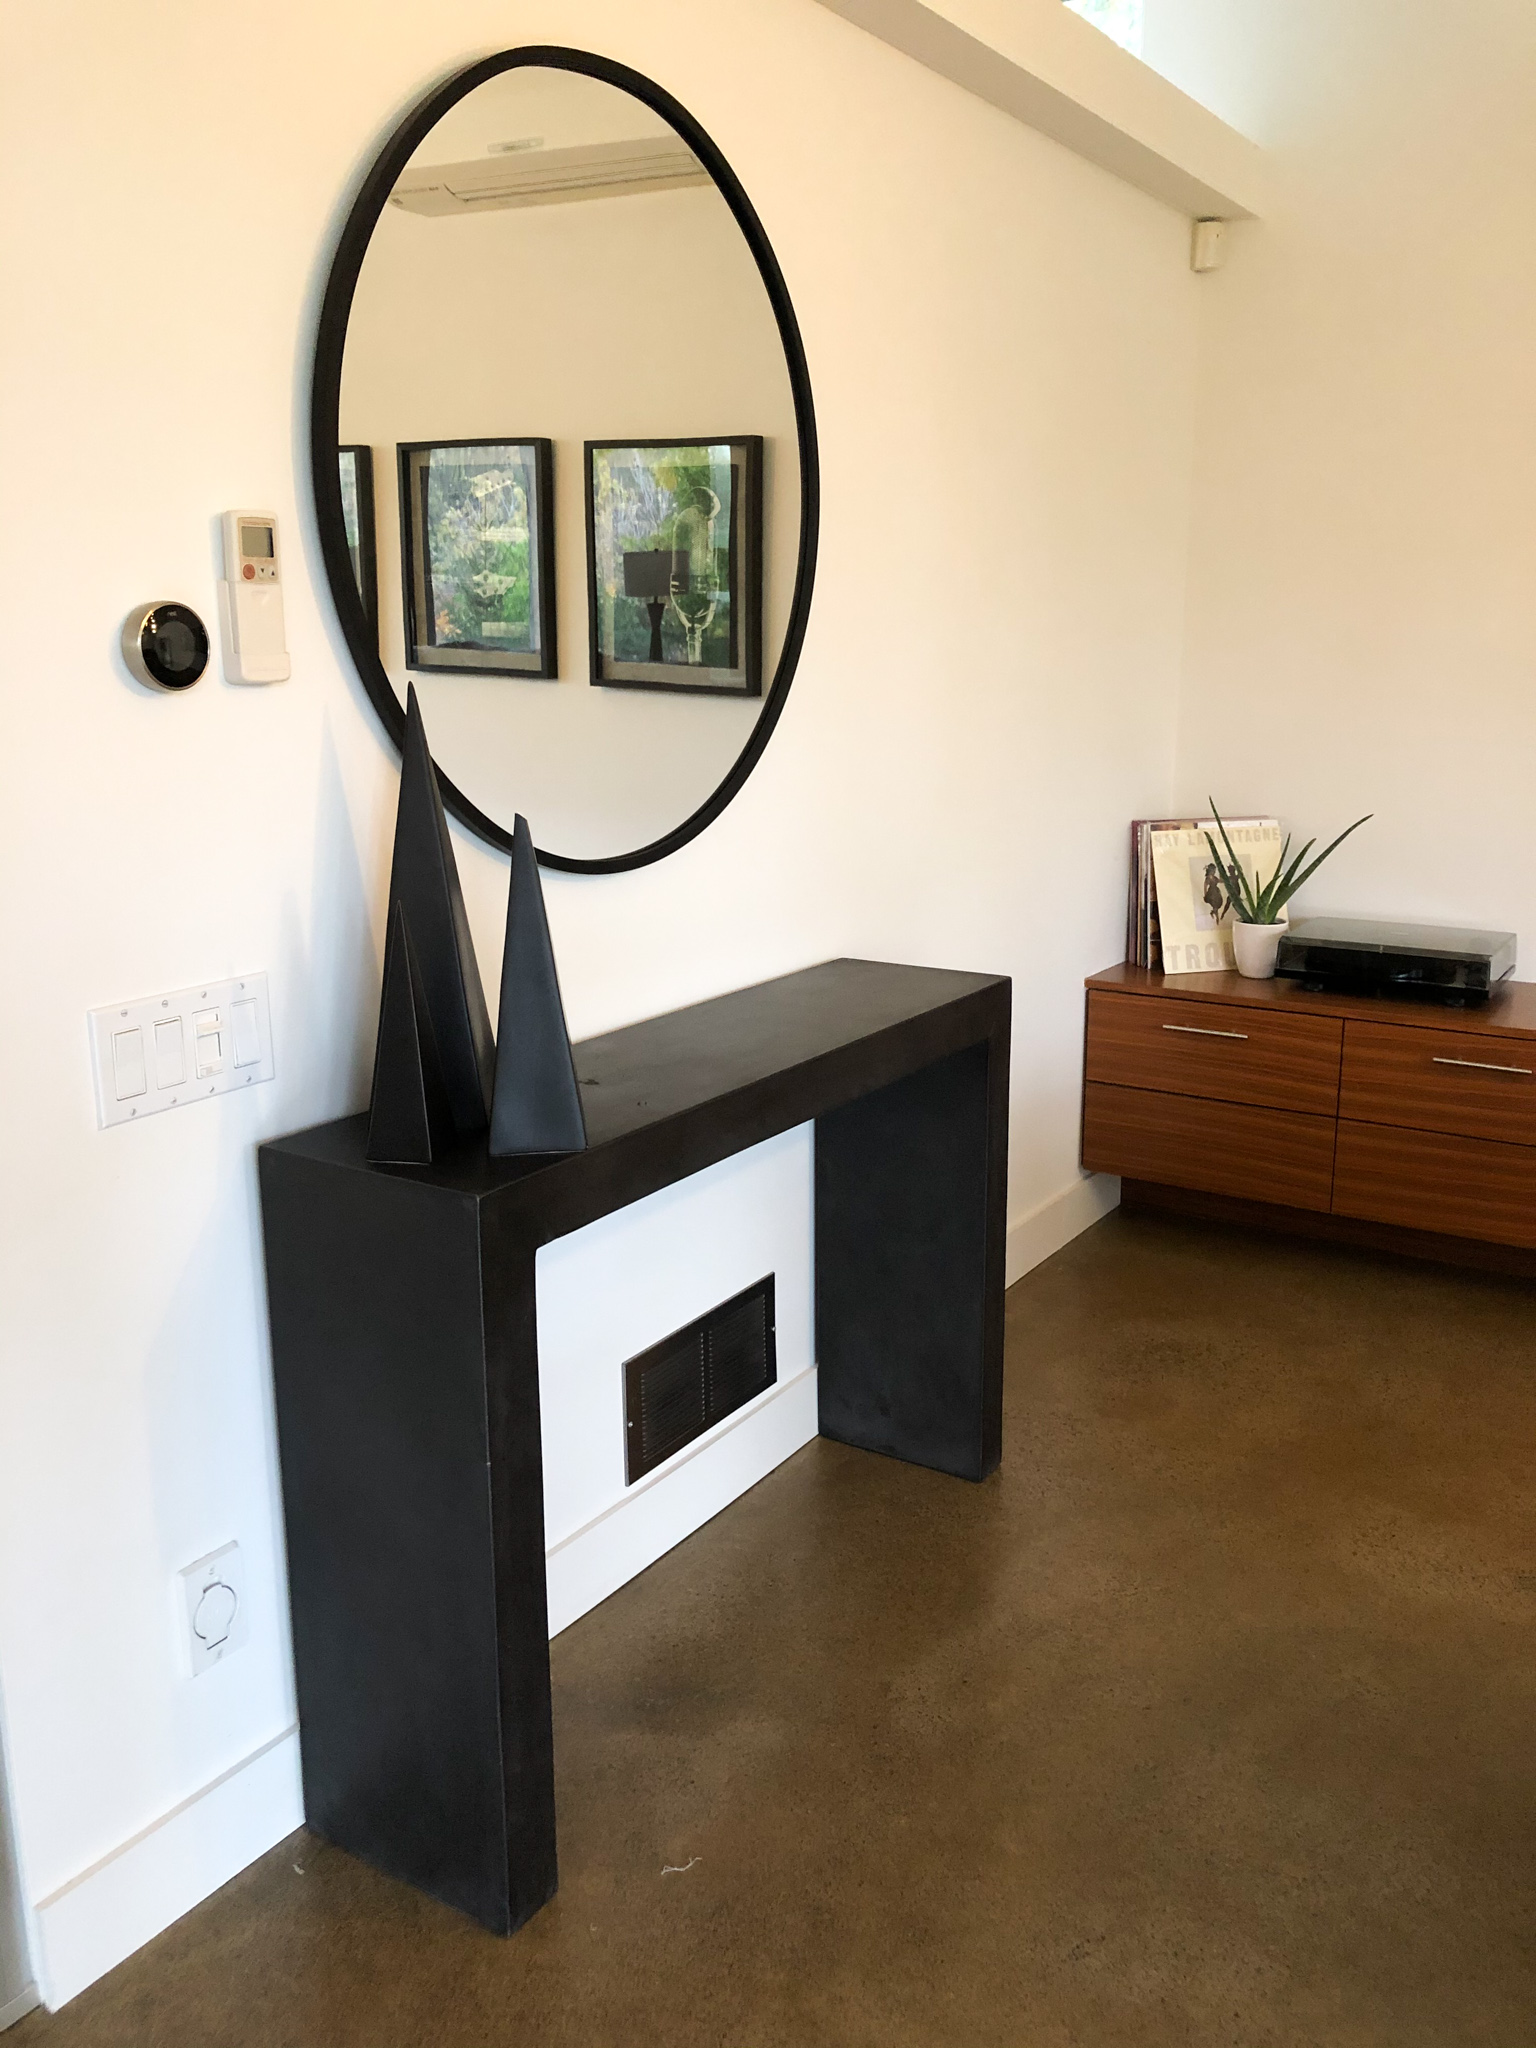 Black Console table with accessories on top and round mirror above